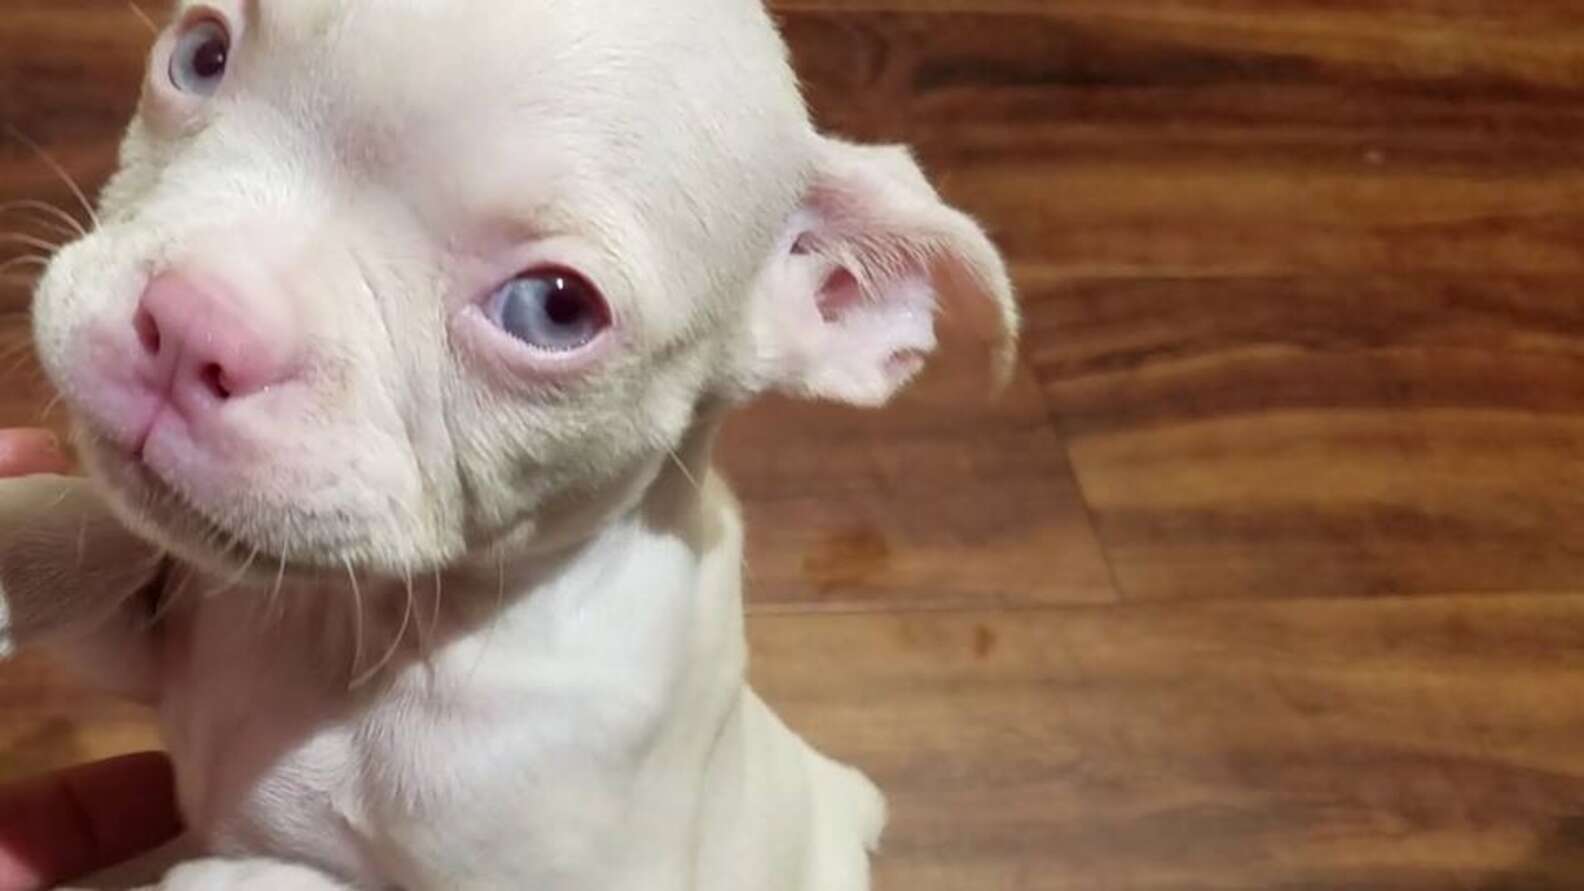 Petland Is Selling This Albino Puppy For $5,500 - The Dodo